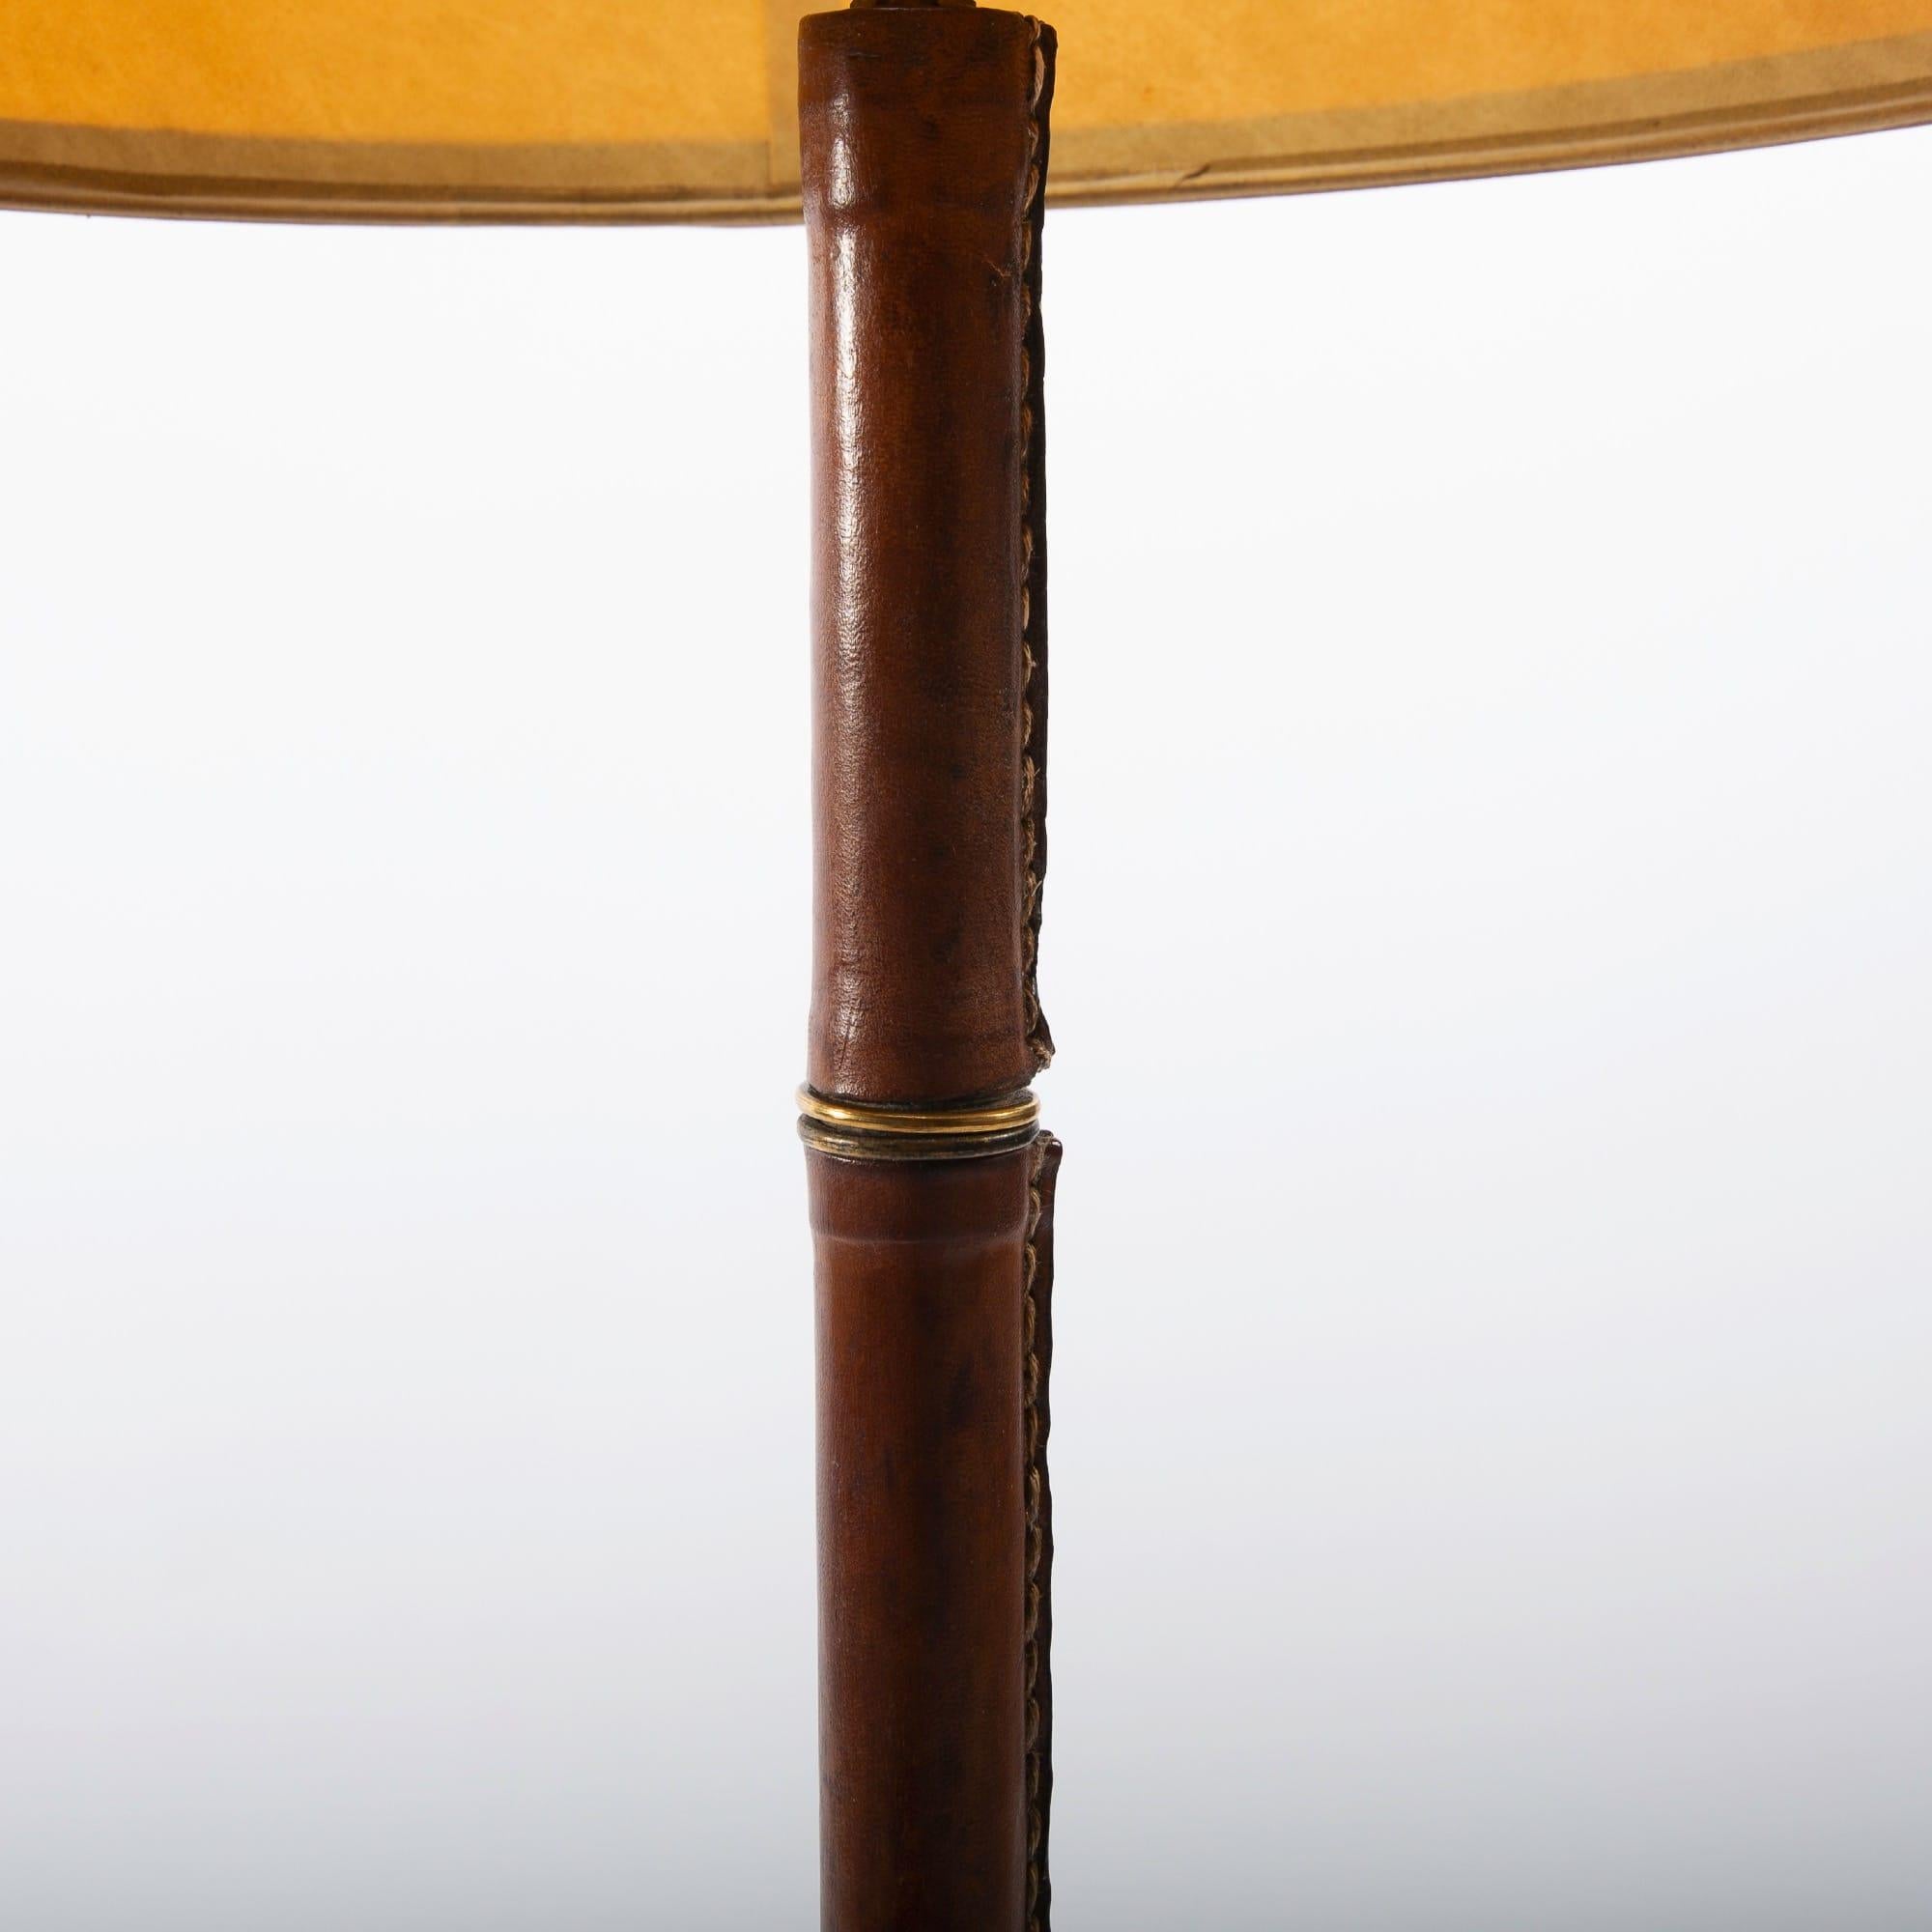 A desk lamp Jacques Adnet (France) circa 1950.
Beautiful saddle stitched tan leather work on a steel frame with brass accents
Original lampshade with leather hem.

Jacques Edouard Jules Adnet was born in Châtillon-Coligny France in 1900 and died